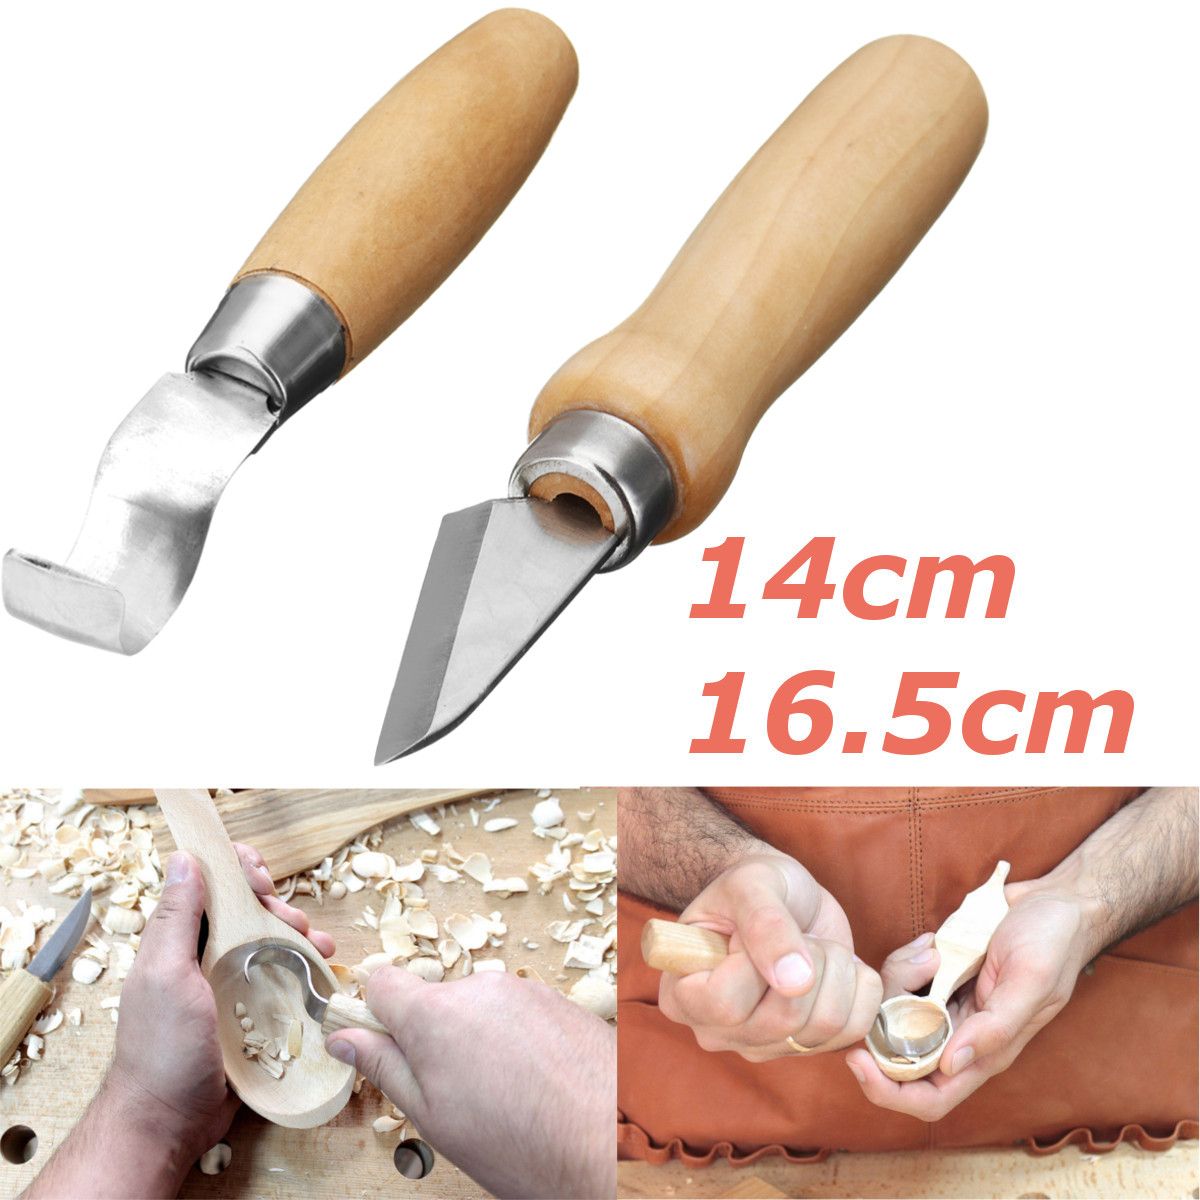 Spoon-Carving-Blades-Set-Wood-Carving-Tool-Crooked-Cutter-Hooked-Whittling-Blade-1369238